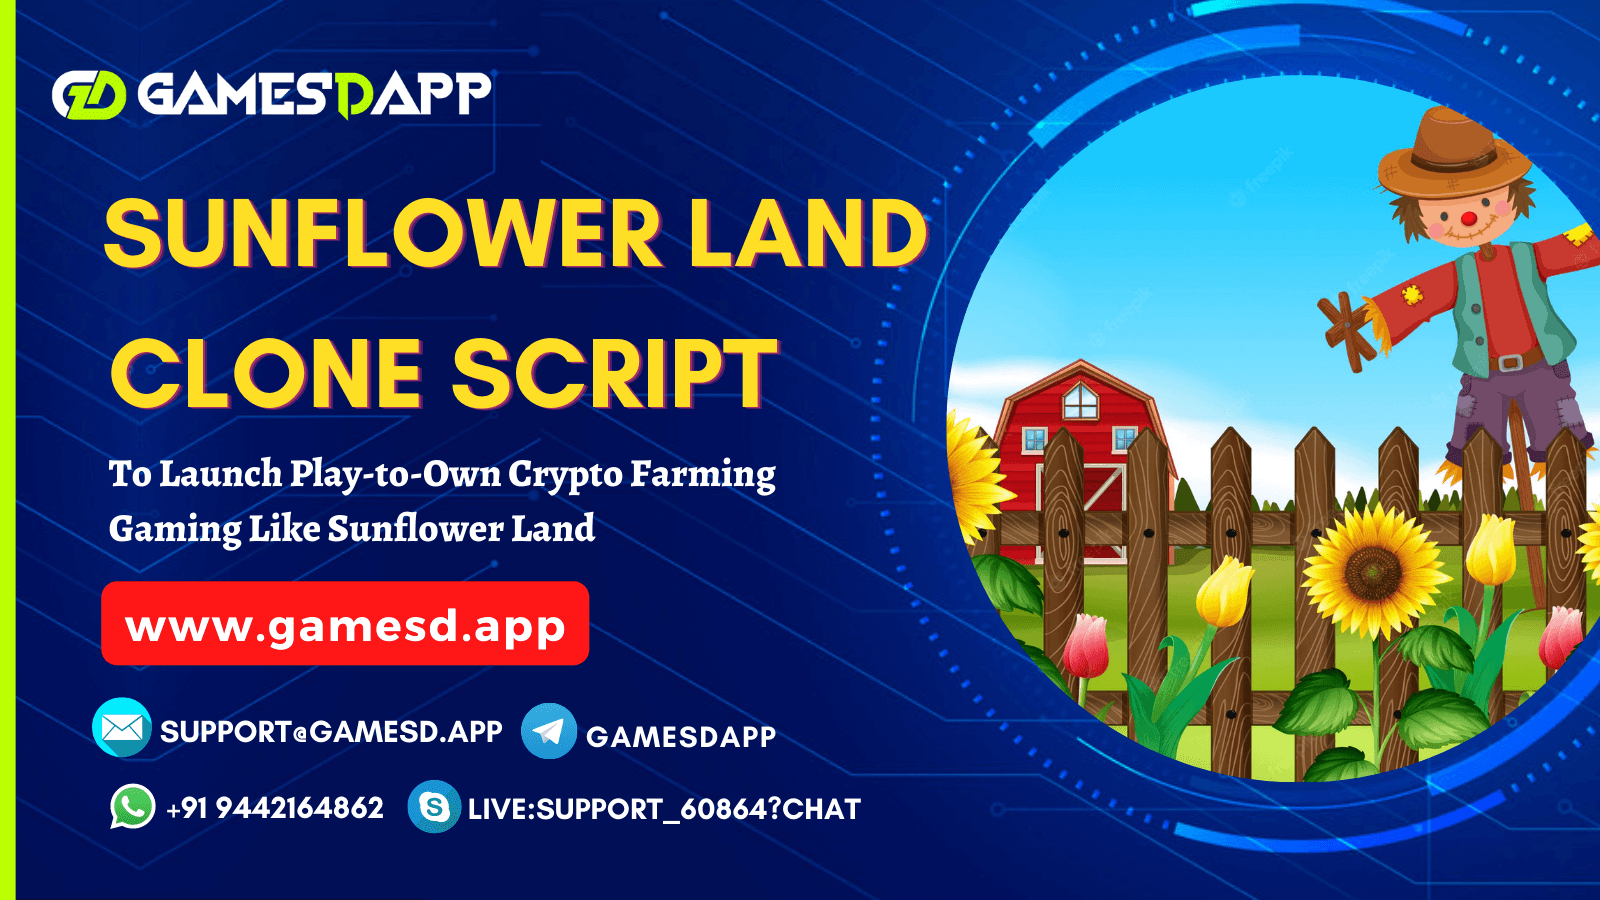 Sunflower Land Clone Script - To Build Crypto Farming Game like Sunflower Land on Polygon.